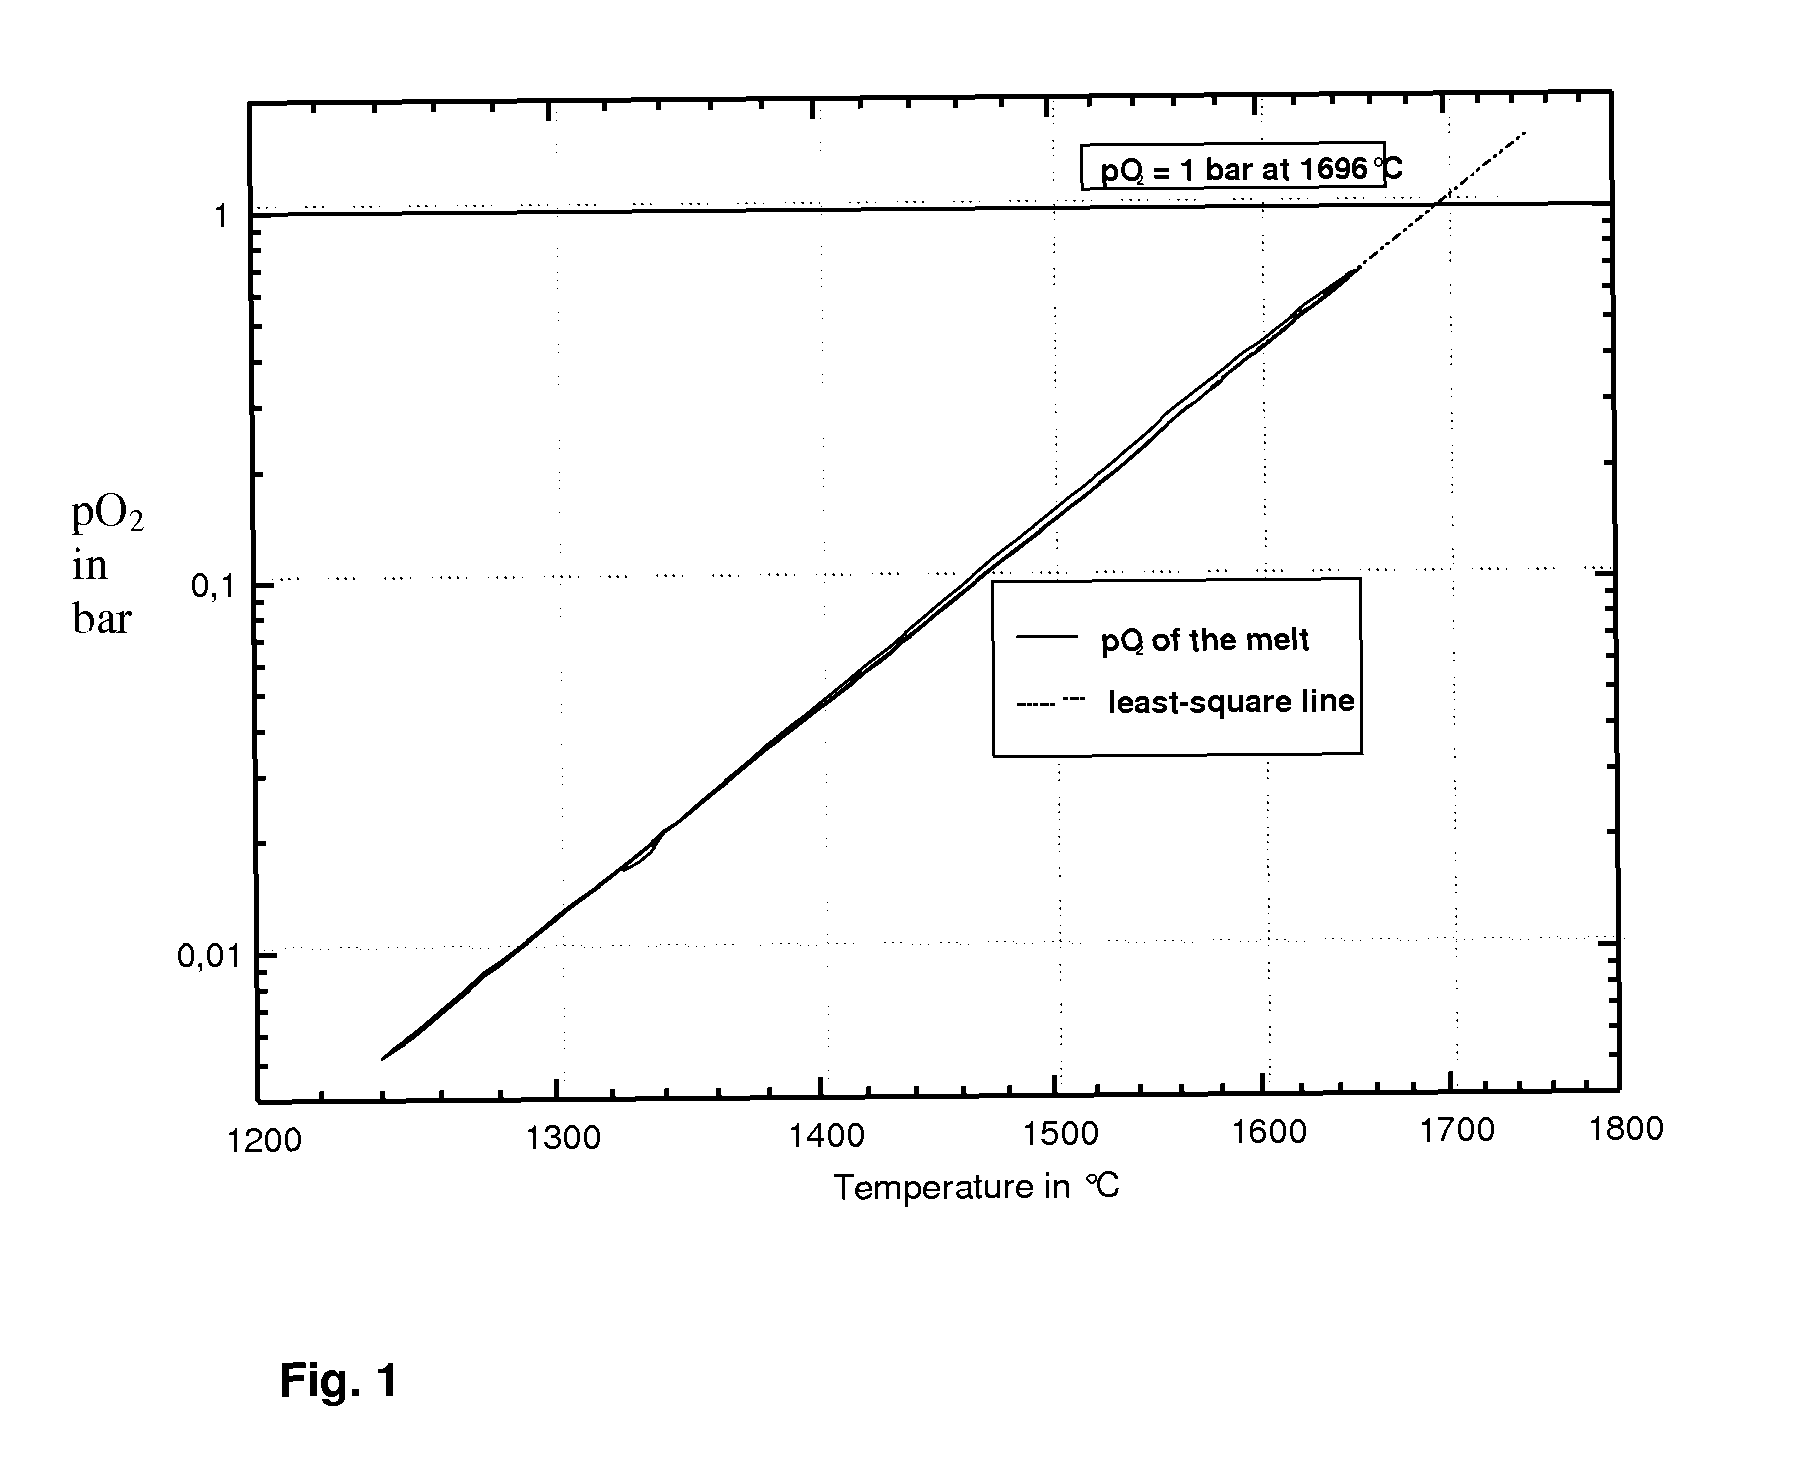 Transparent, dyed cooktop having improved color display capability, and method for producing such a cooktop